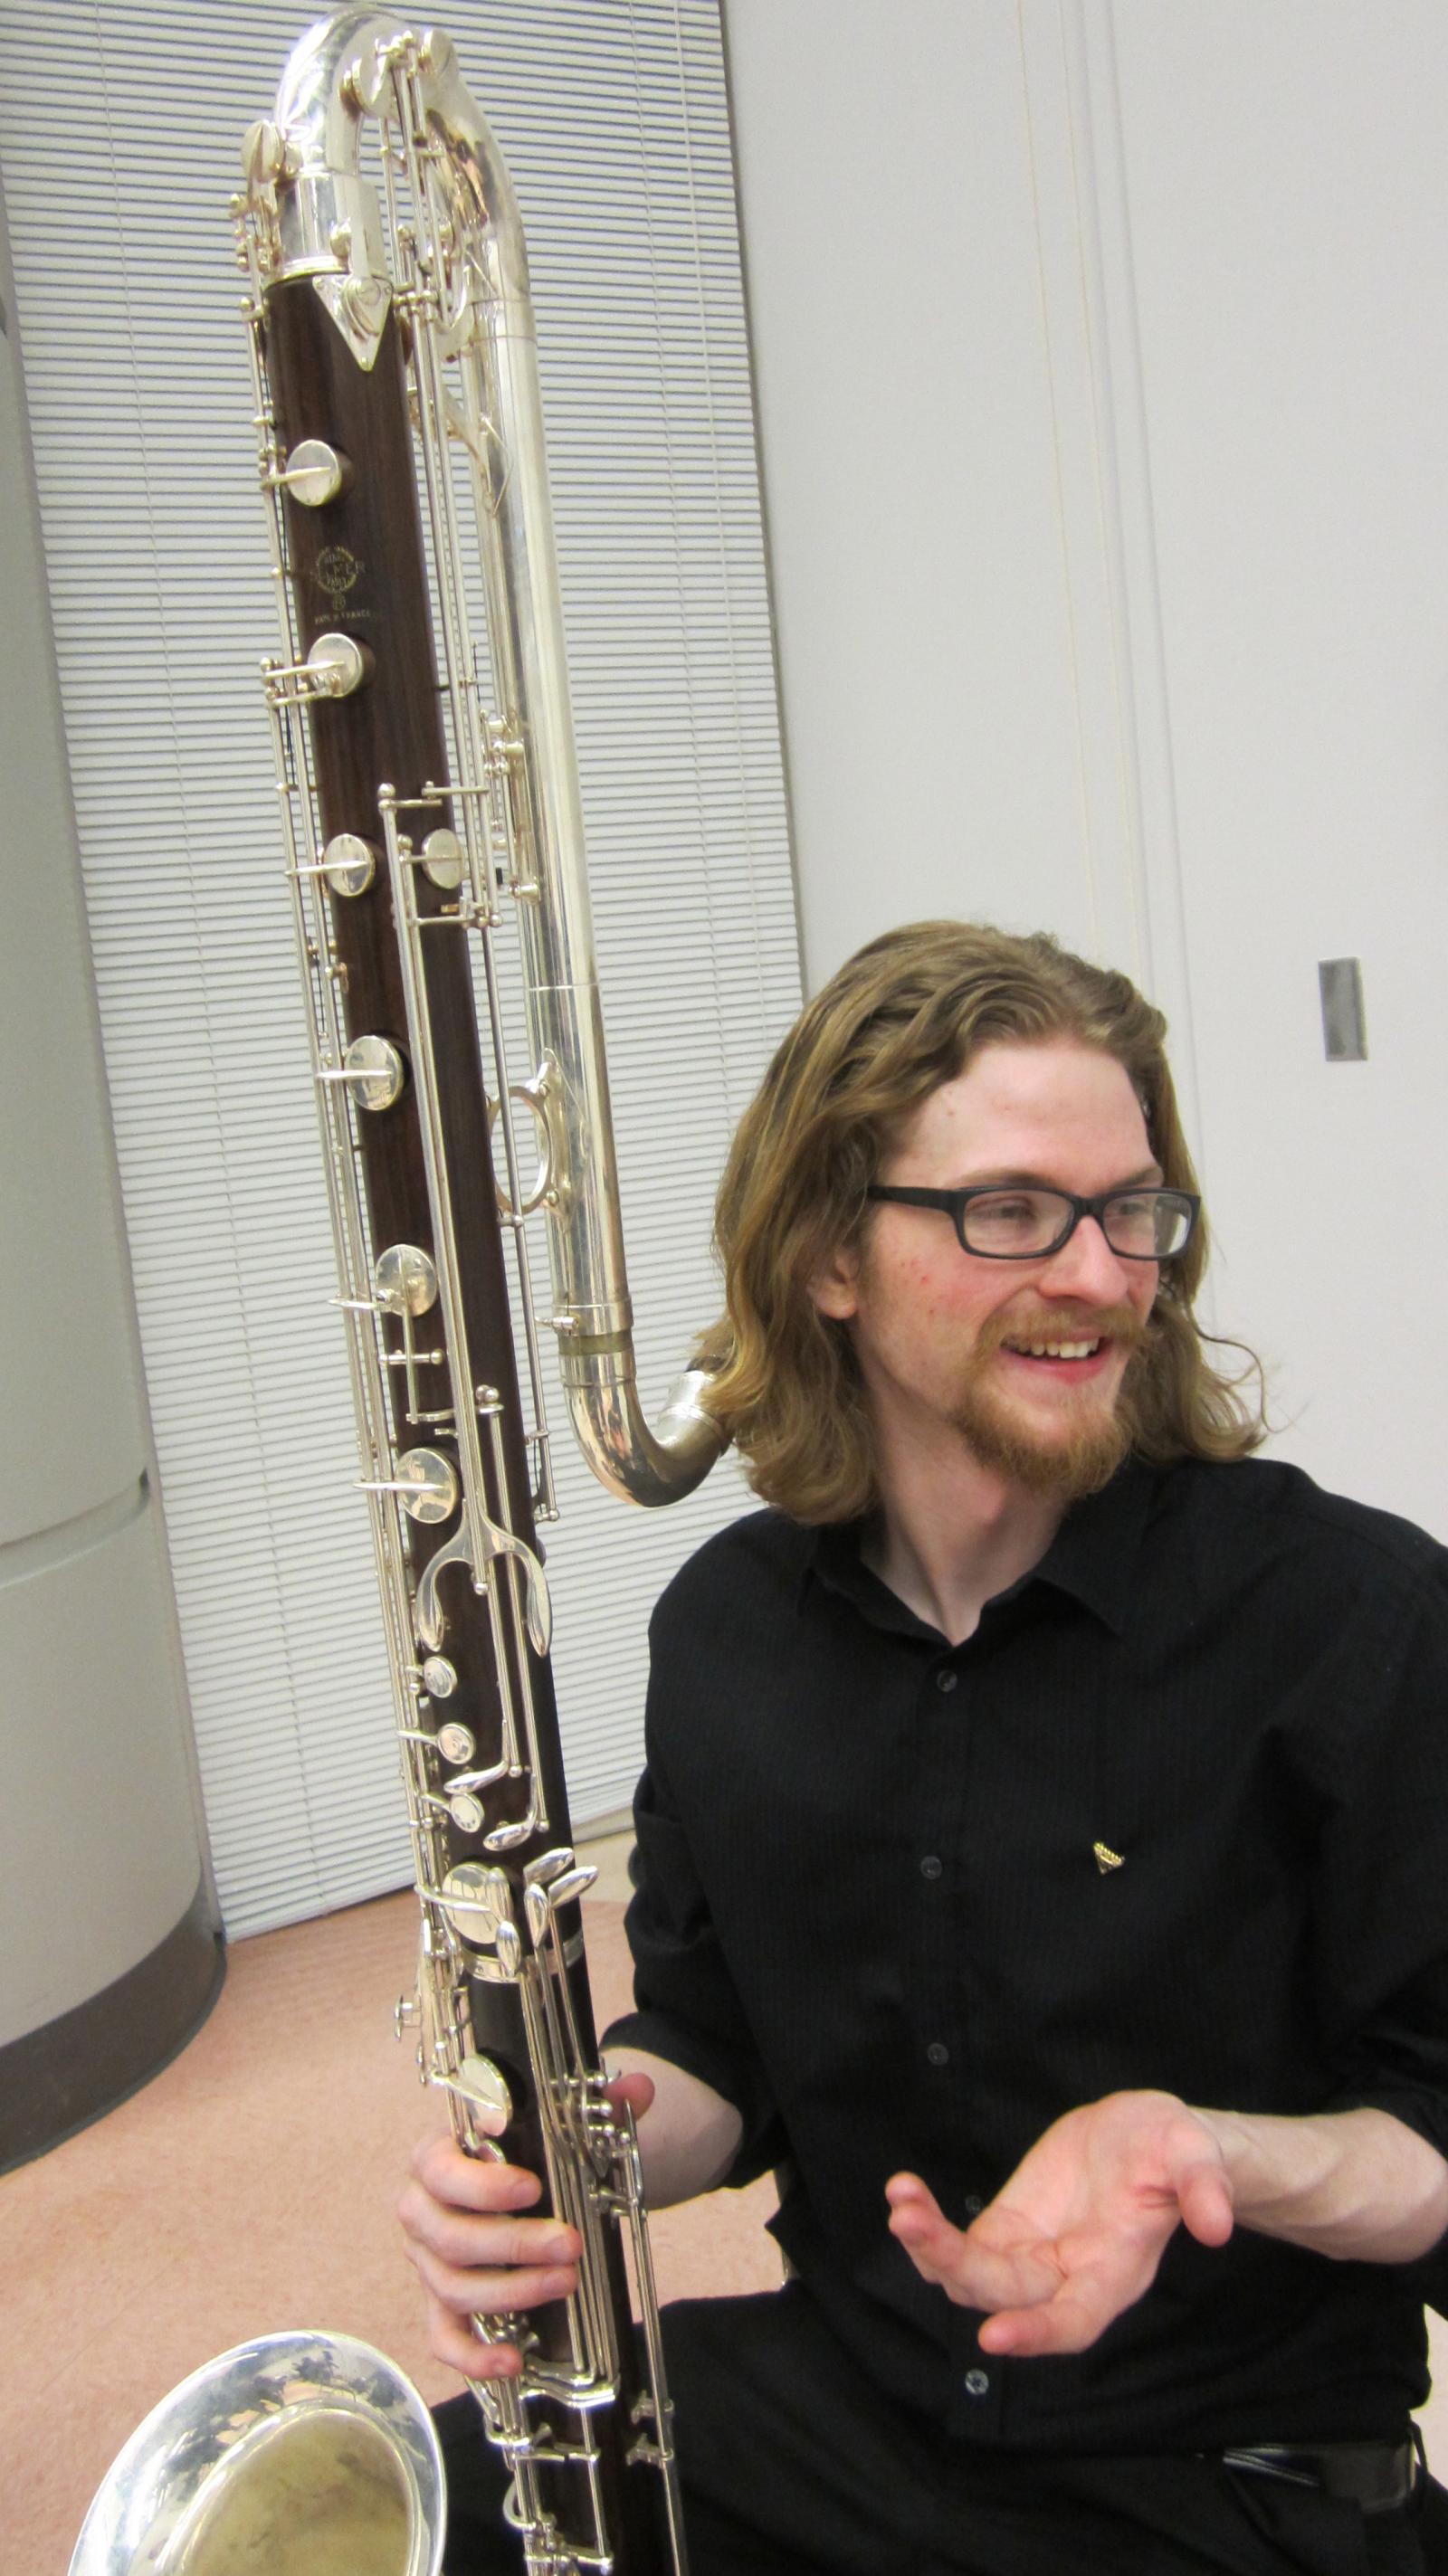 Student with a contrabass clarinet